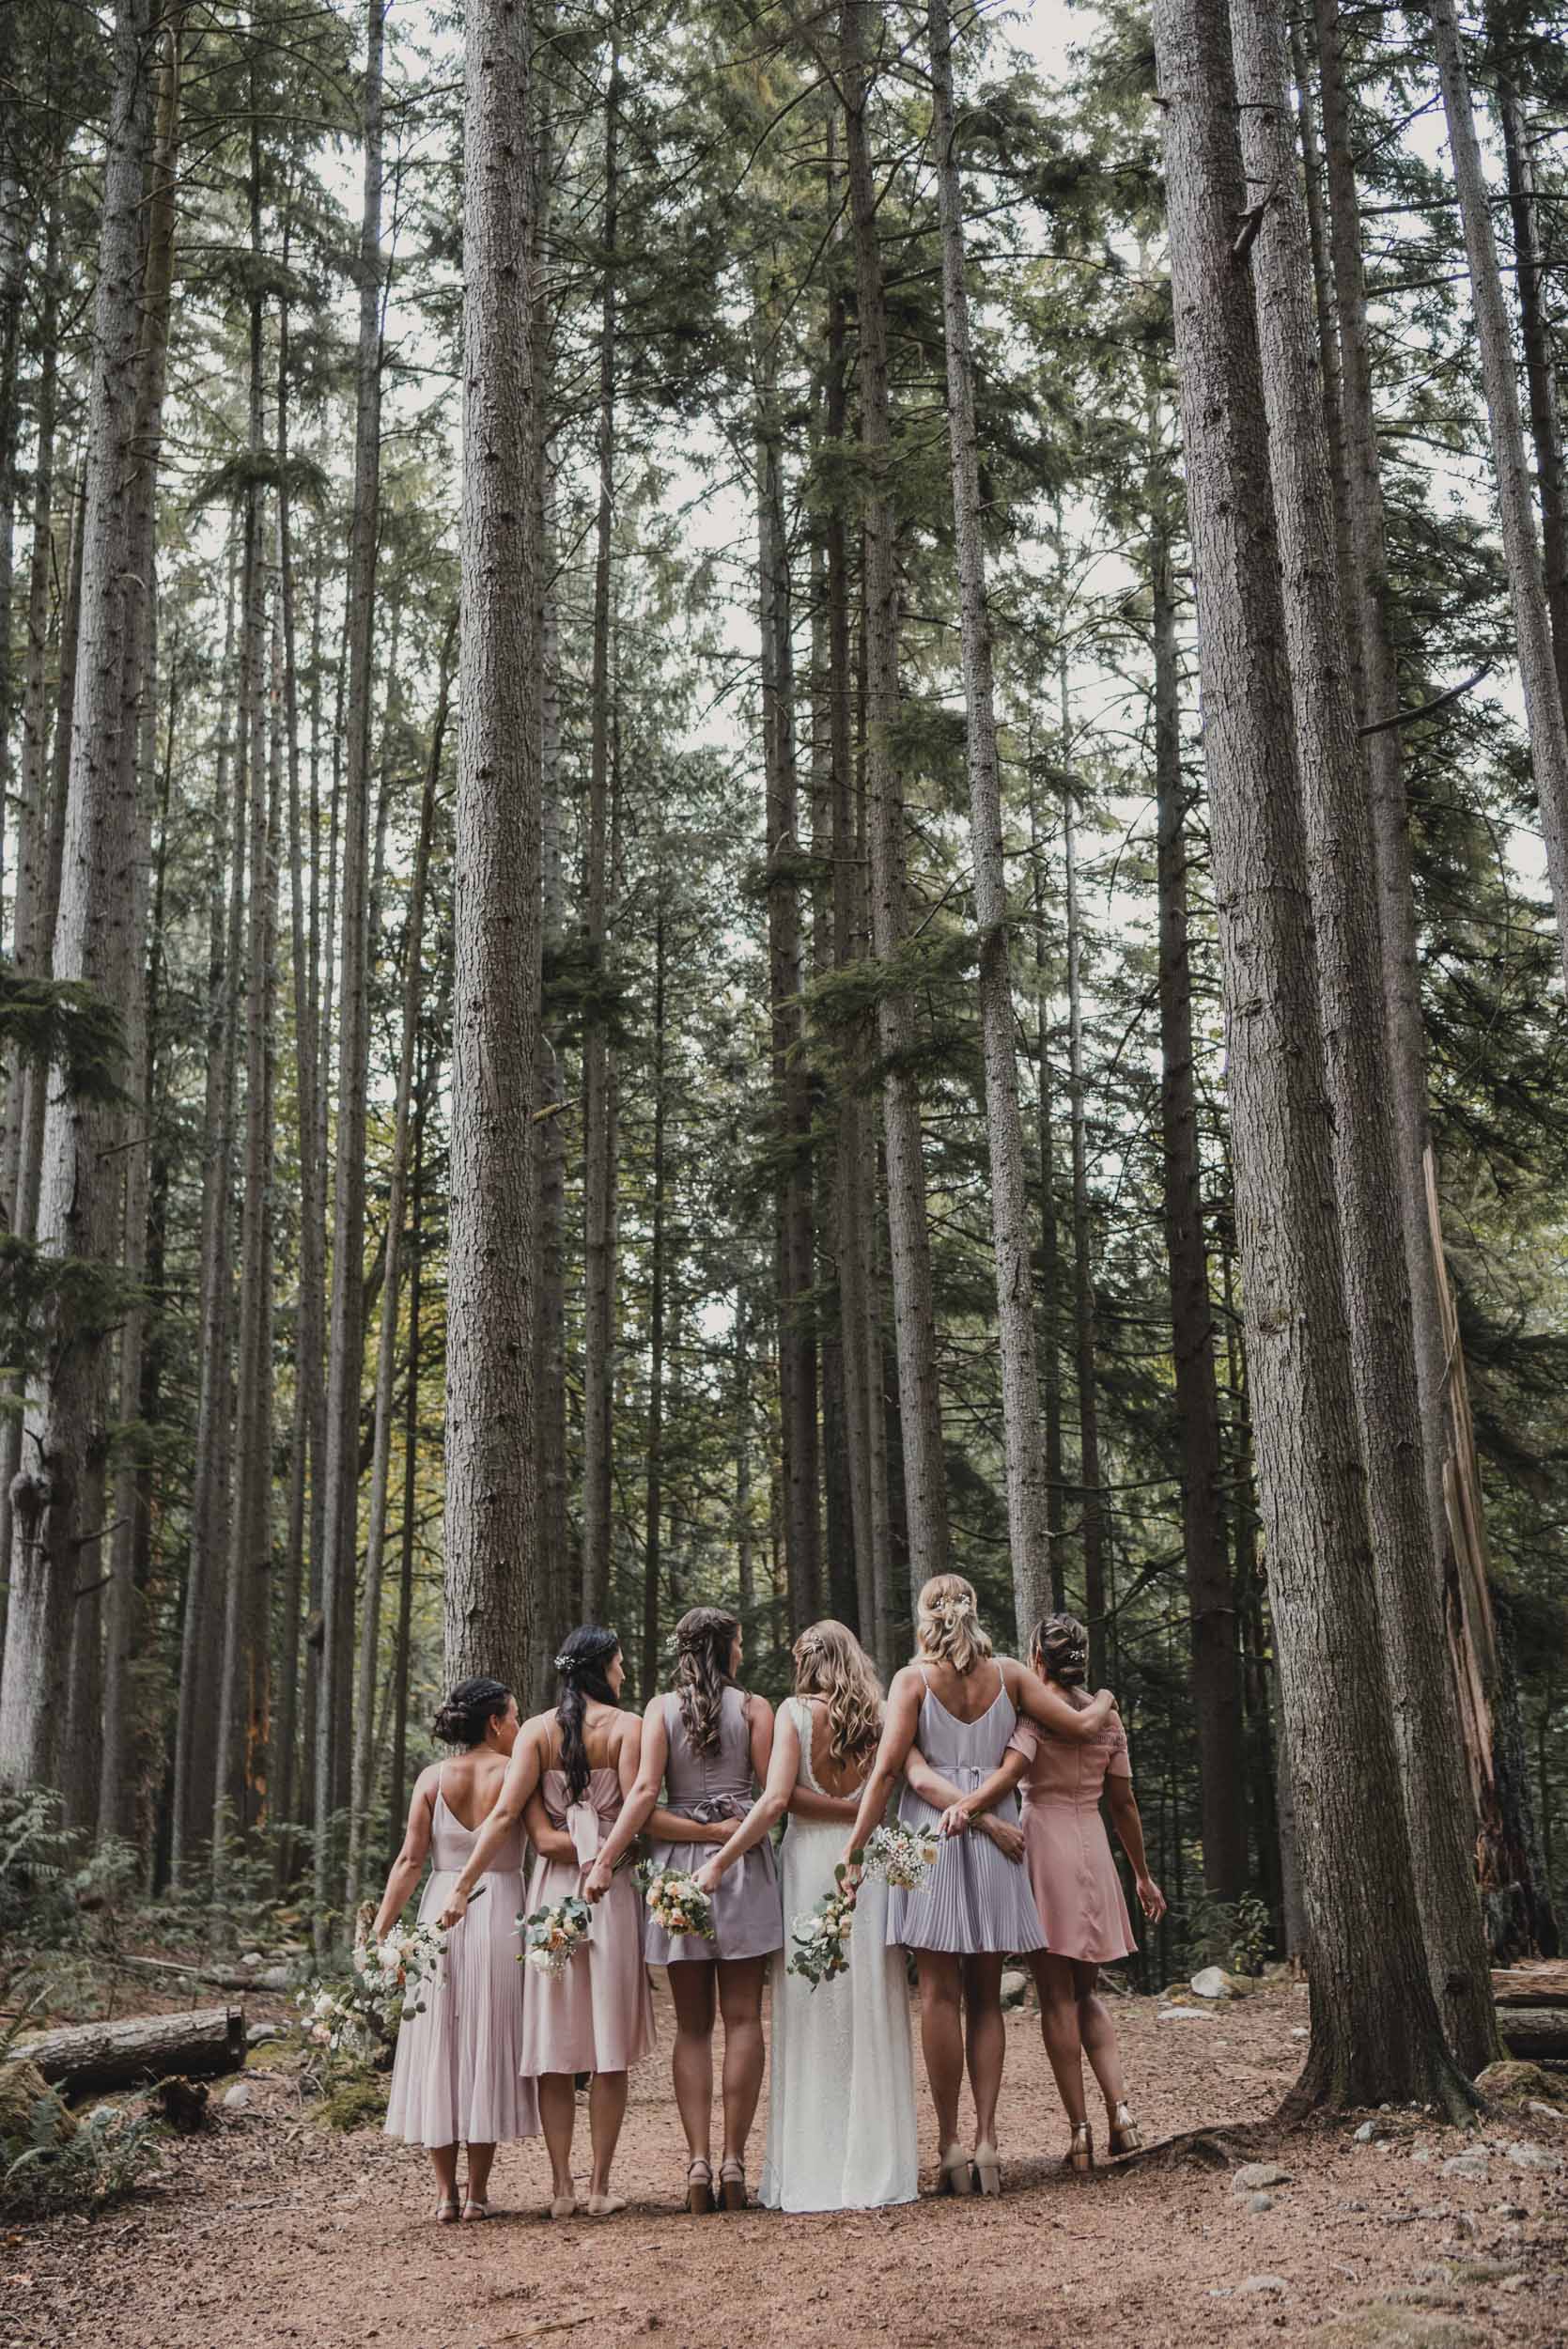 Bride and bridesmaids in forest